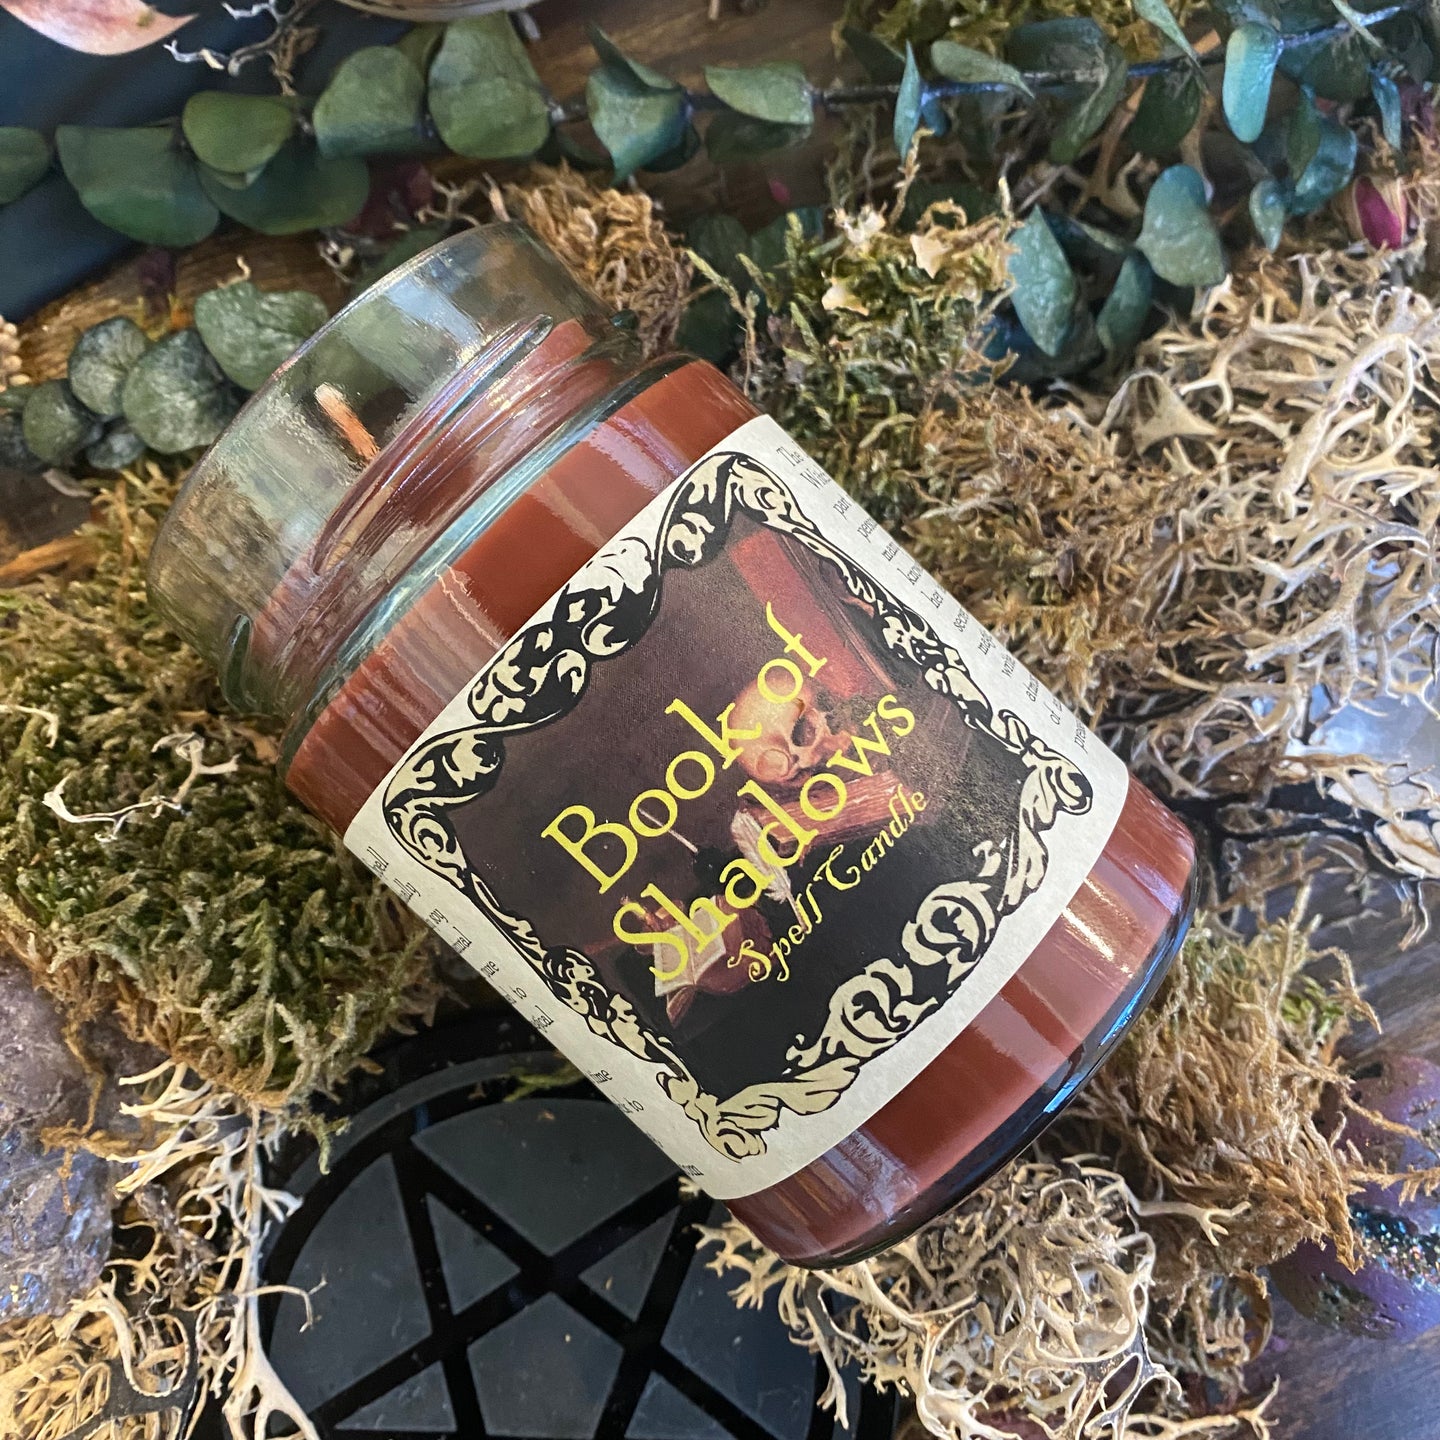 Book of Shadows Candle